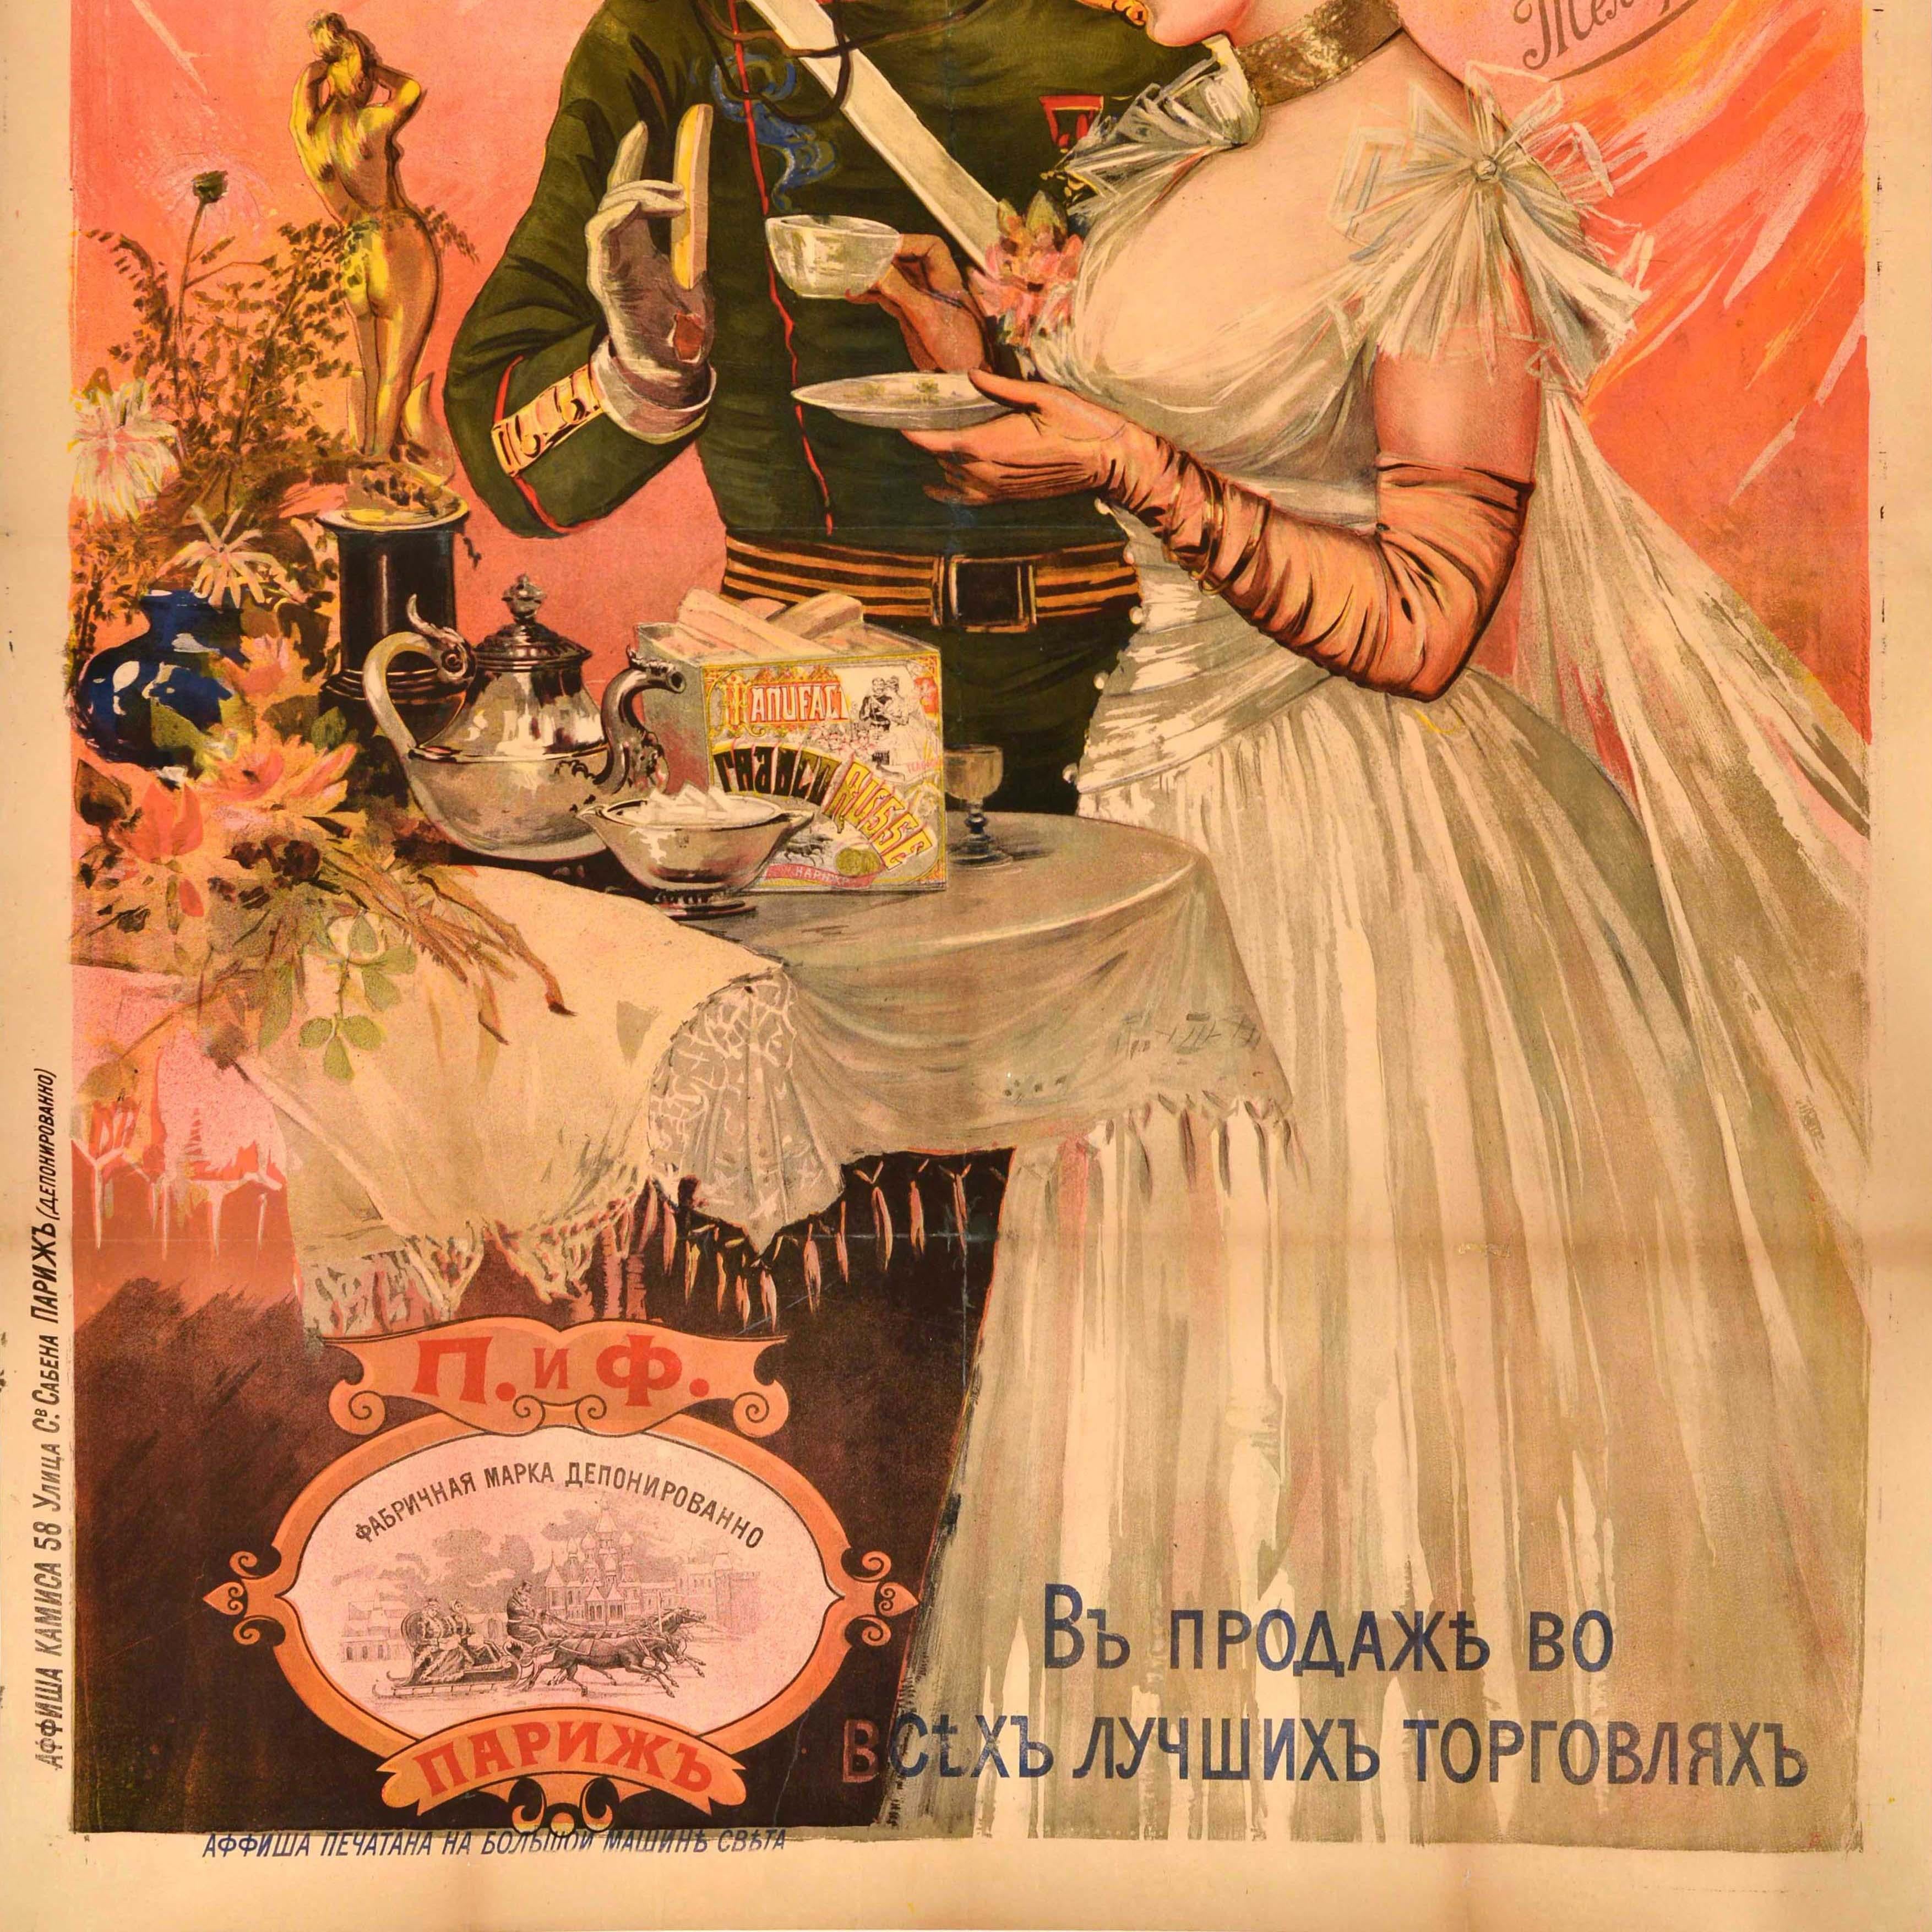 Original antique food advertising poster for the Франко Русская Фабрика / Franco Russian Factory featuring a Belle Epoque style illustration of an elegant lady in a white dress holding a cup of tea and a gentleman with a moustache in uniform wearing